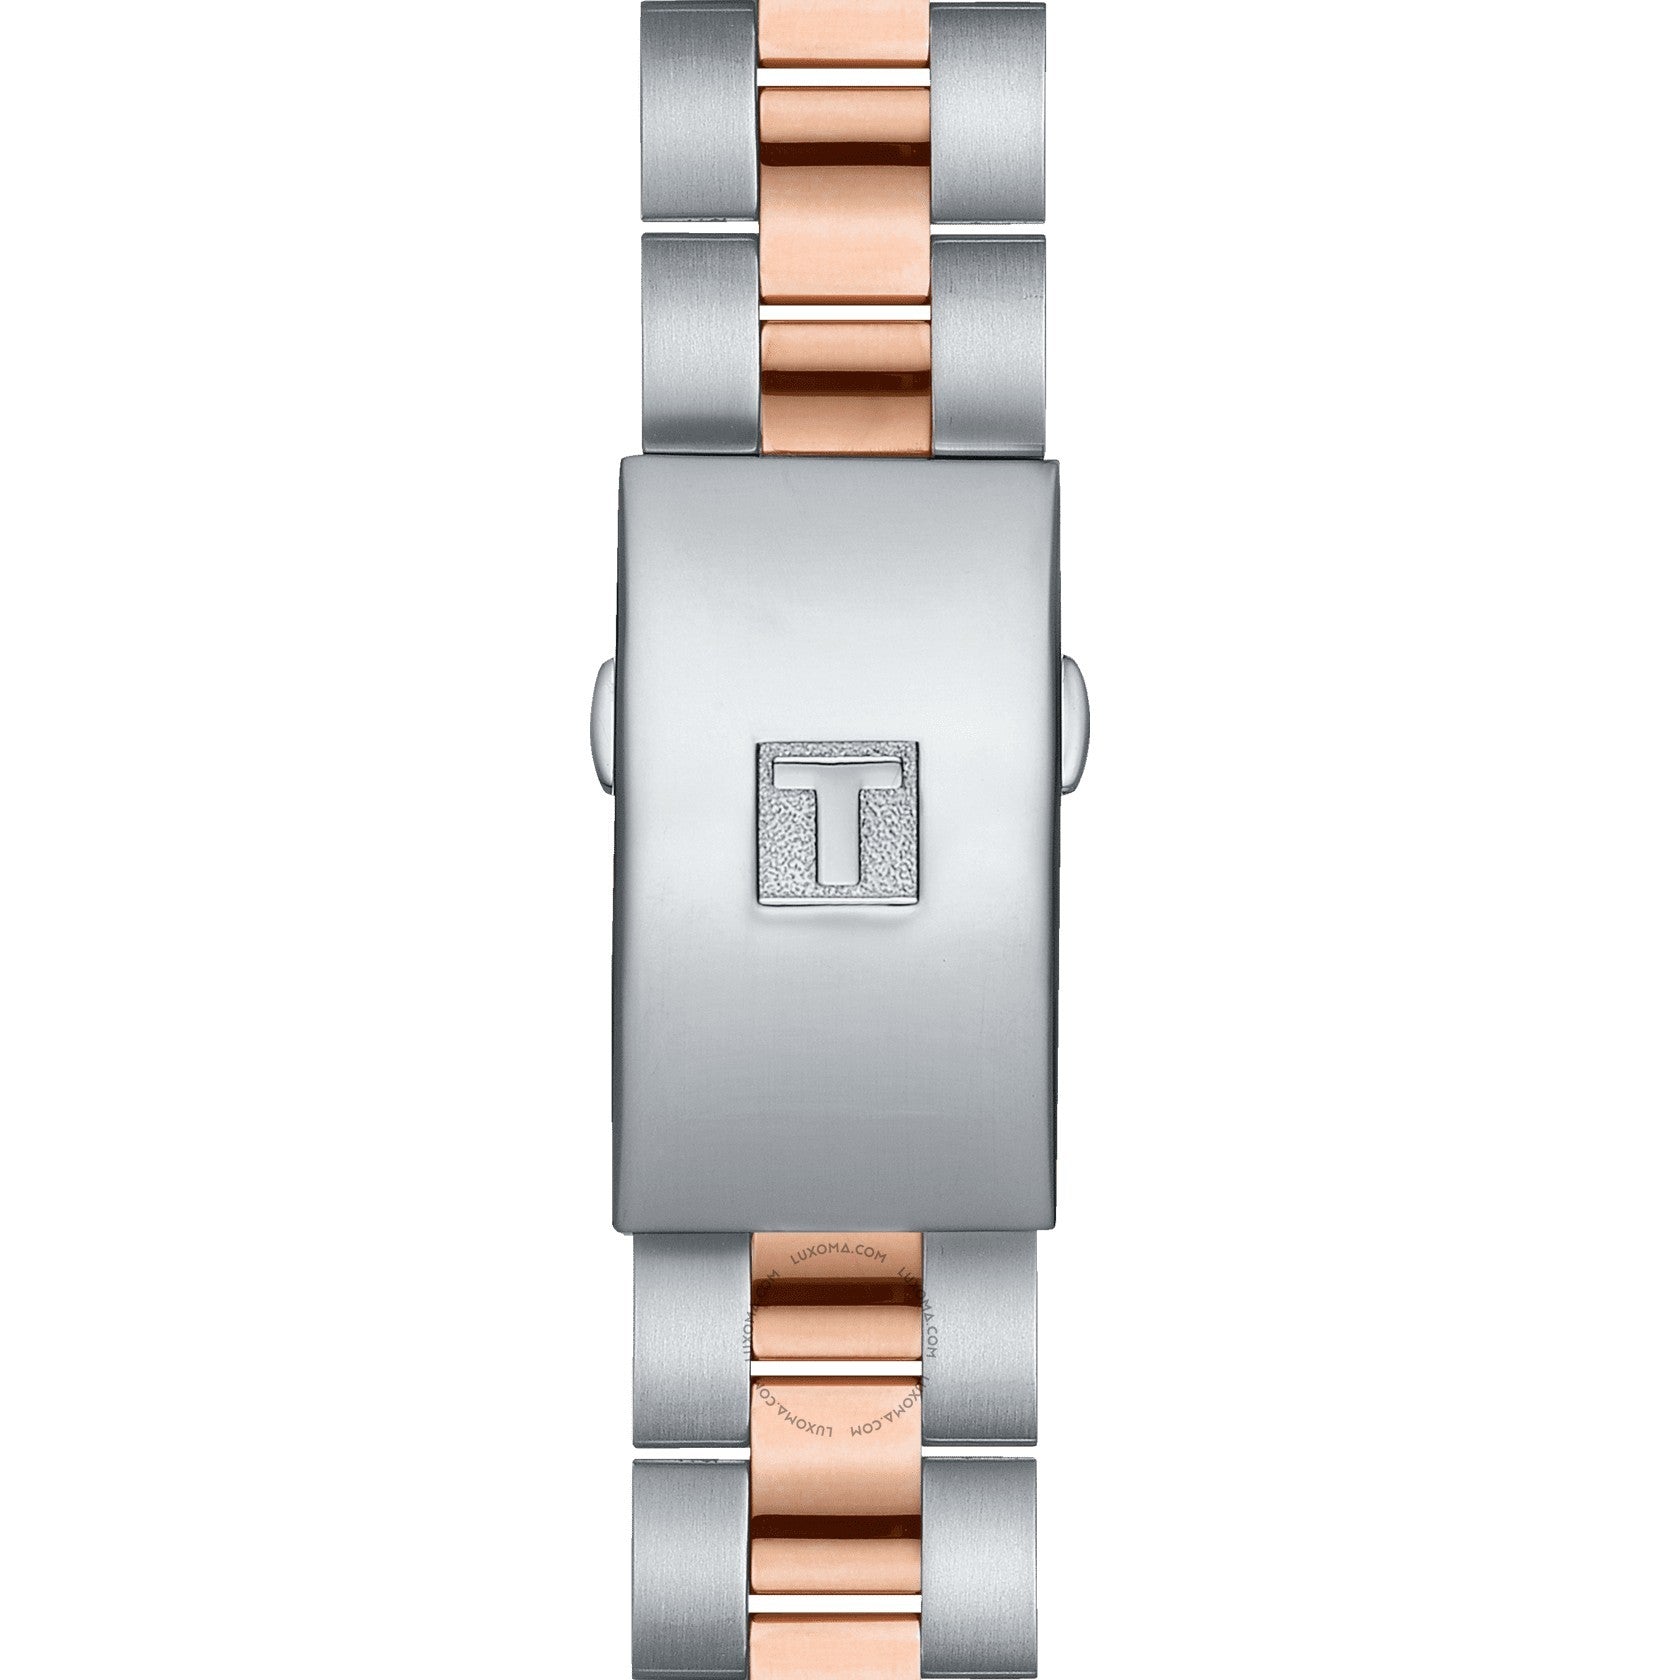 Tissot Tissot PR 100 Sport Chic Chronograph Pink Mother of Pearl Dial Ladies Watch T101.917.22.151.00